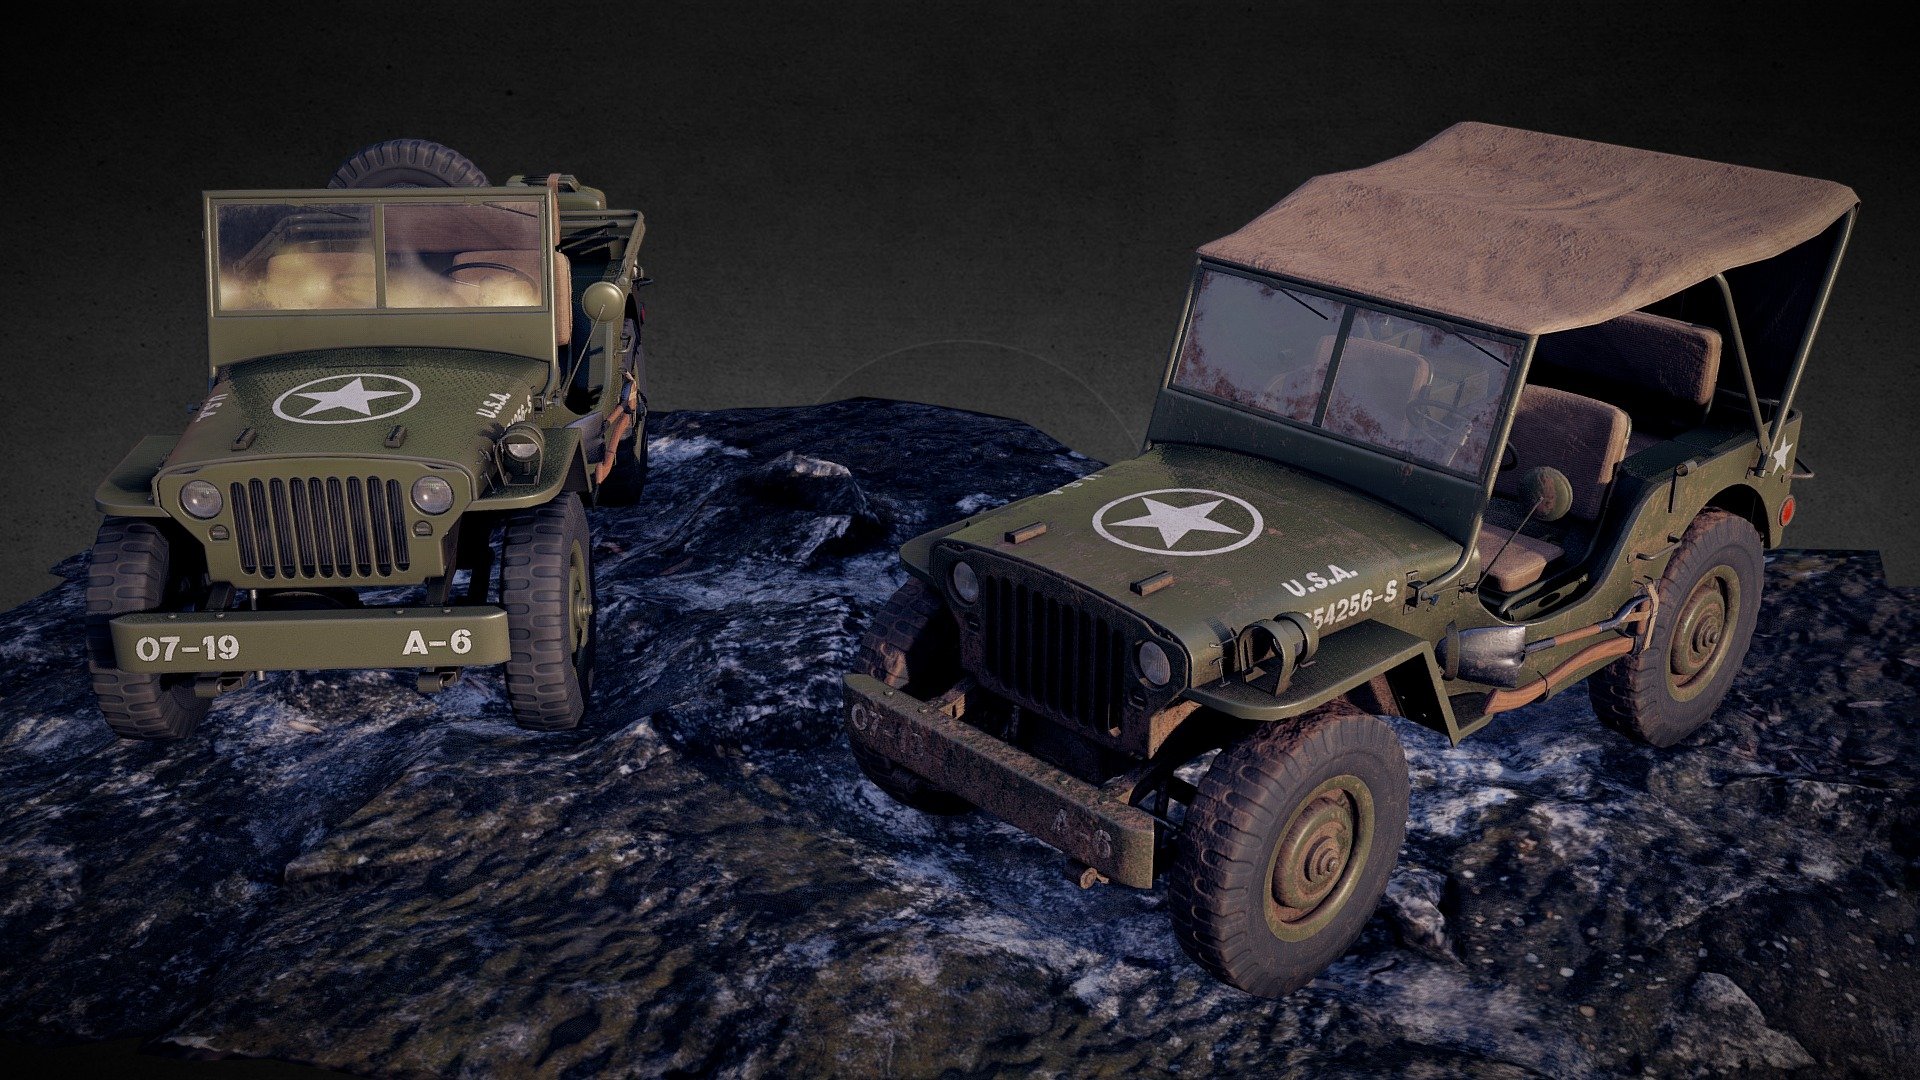 Artstation post: https://www.artstation.com/artwork/qVRKz

The model and texture for the ground plane was provided by https://twitter.com/brumcgi

Lowpoly PBR Military WW2 era US Army Jeep.
The model is not rigged, but all the moveable parts are separated (including buttons and gauges on the dashboard), with proper hierarchy set up, so the model can be easily rigged and animated.
The model has two textures set, the main one is provided in 4k, the additional one (for the removable parts of the model, such as the roof, gascan, spare tire, axe and shovel) are in 2k.

Full model and high res textures are in the additional files archive;

The model has 4 texture variations:





Clean;




Dirty;




Clean w/o markings;




Dirty w/o markings



Texture types:





AO;




Base Color;




Base Color/Opacity (Unity);




Normal (DirectX);




Normal (OpenGL);




Metallic;




Roughness;




Metallic/Roughness (Unity);




Opacity


 - Military Jeep - 3D model by soidev 3d model